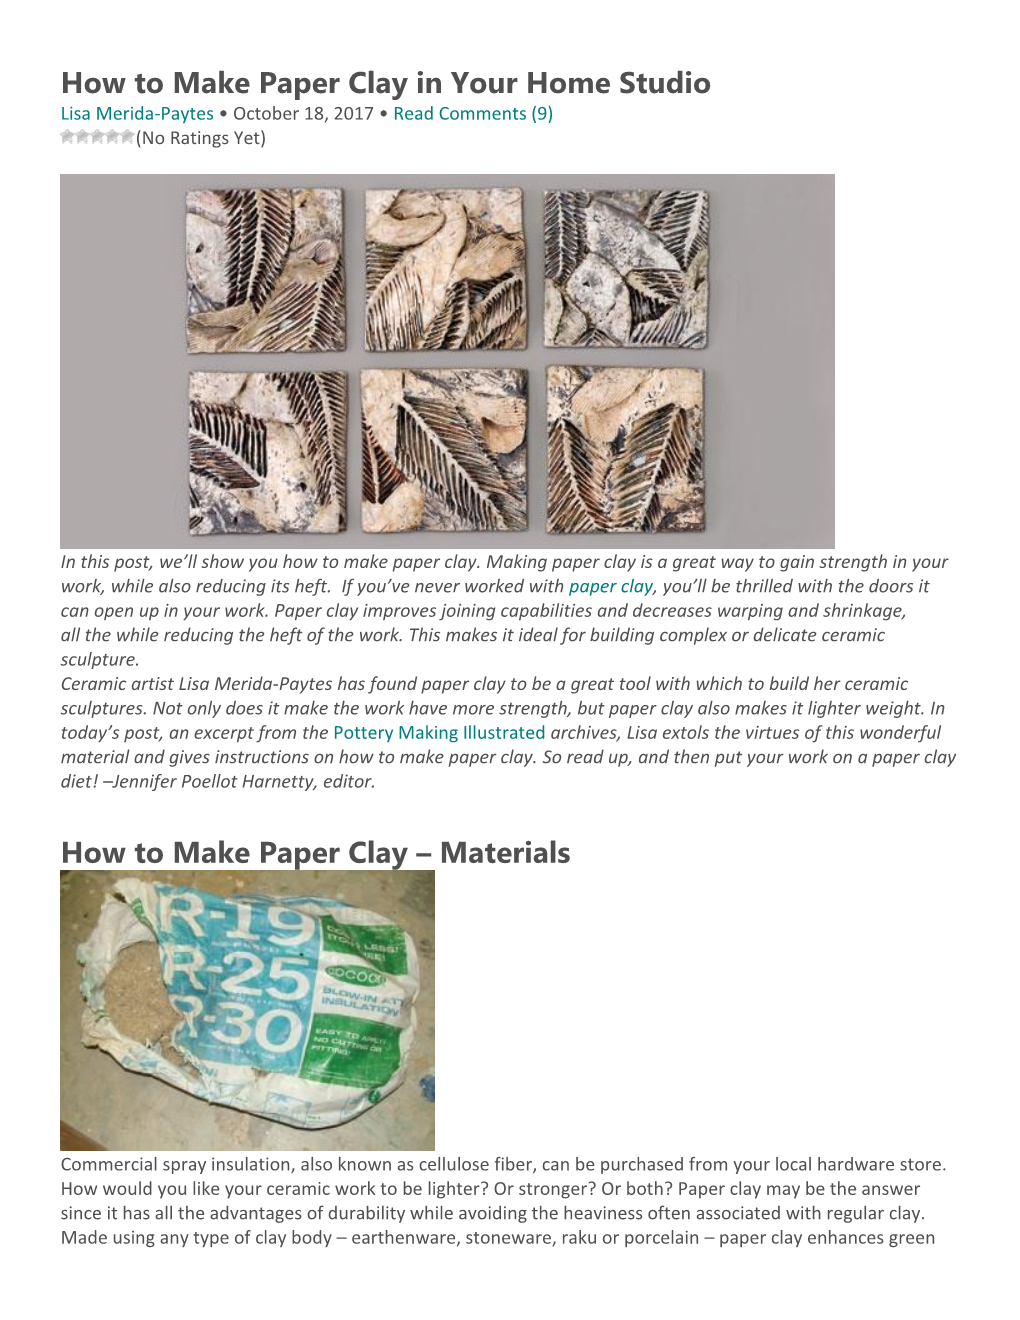 How to Make Paper Clay in Your Home Studio Lisa Merida-Paytes • October 18, 2017 • Read Comments (9) (No Ratings Yet)